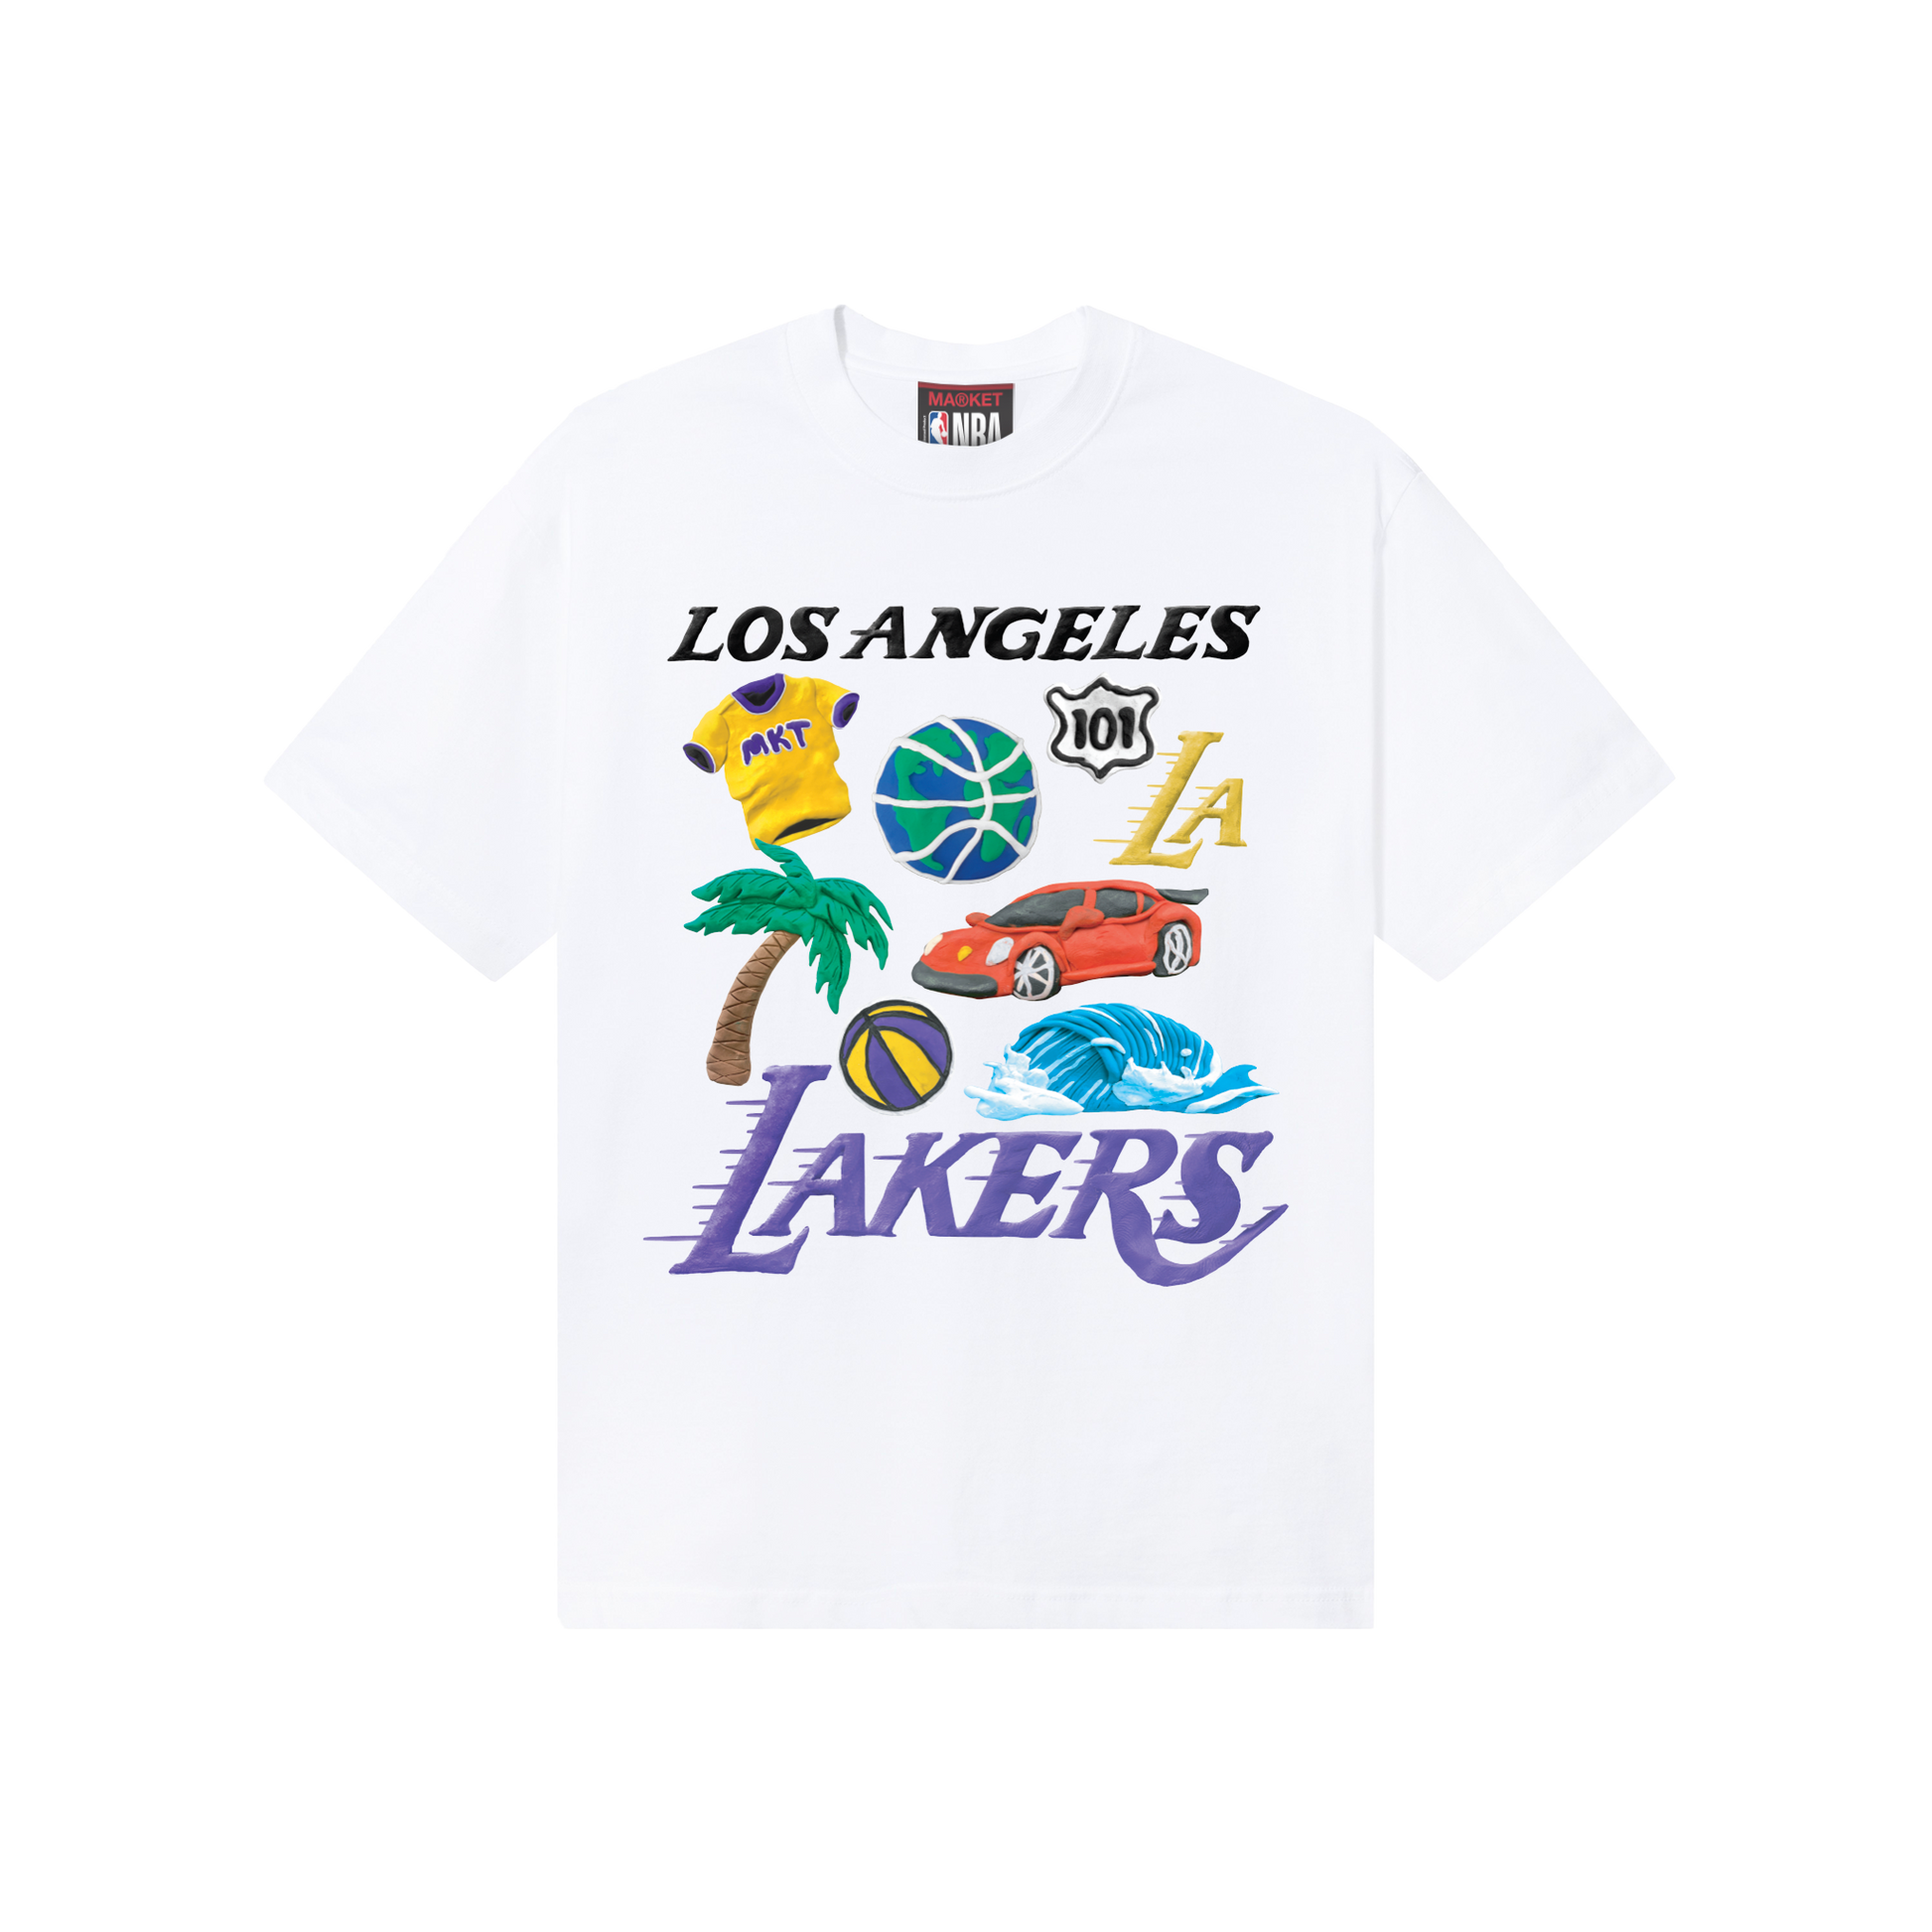 MARKET clothing brand MARKET LAKERS T-SHIRT. Find more graphic tees, hats, hoodies and more at MarketStudios.com. Formally Chinatown Market.